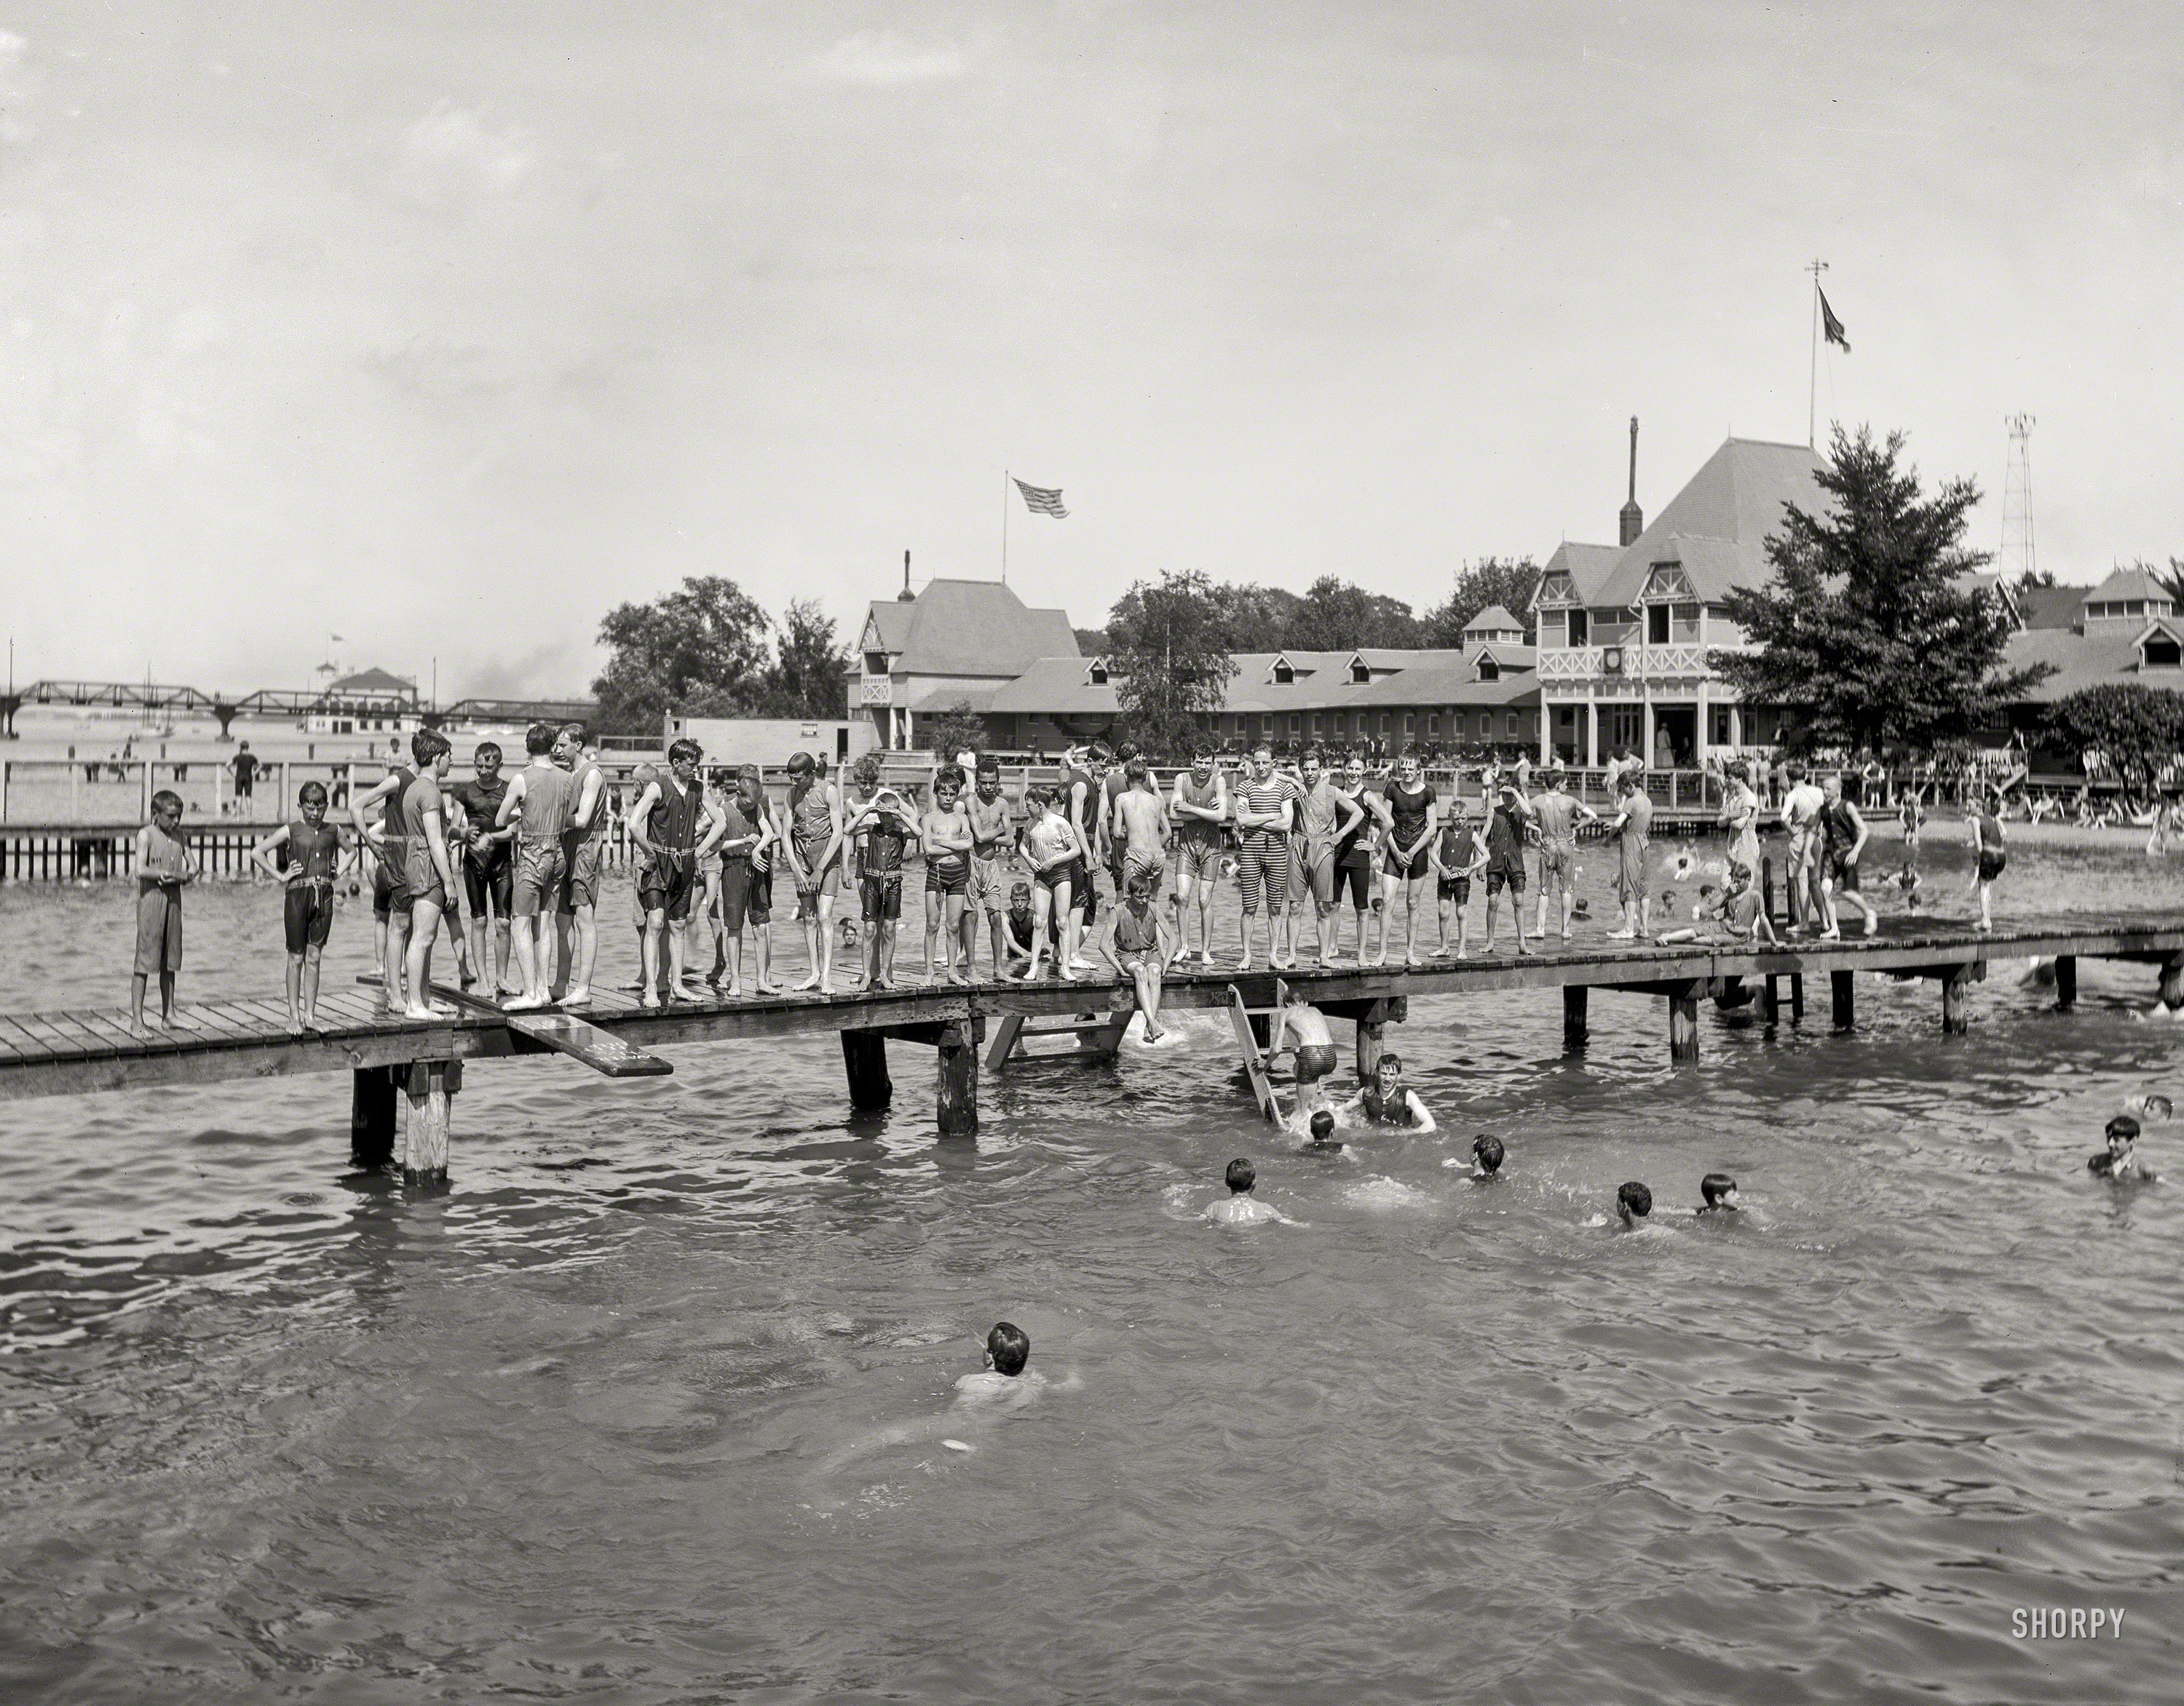 Detroit circa 1903. "Swimming pool at Belle Isle Park." 8x10 inch dry plate glass negative, Detroit Publishing Company. View full size.